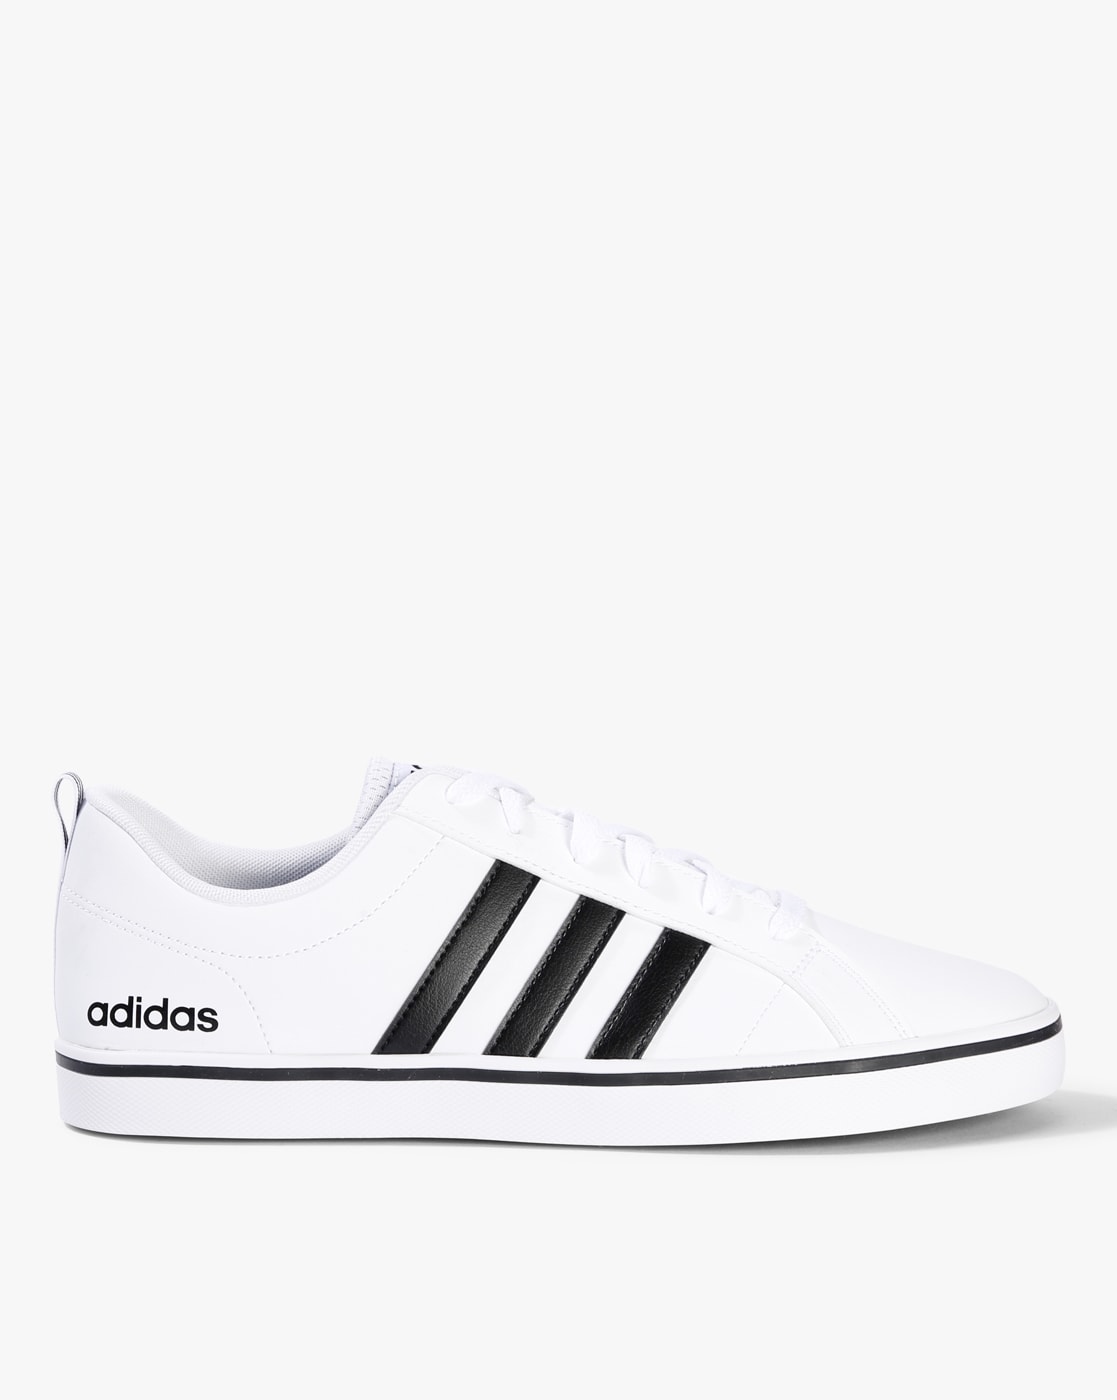 adidas white casual sneakers